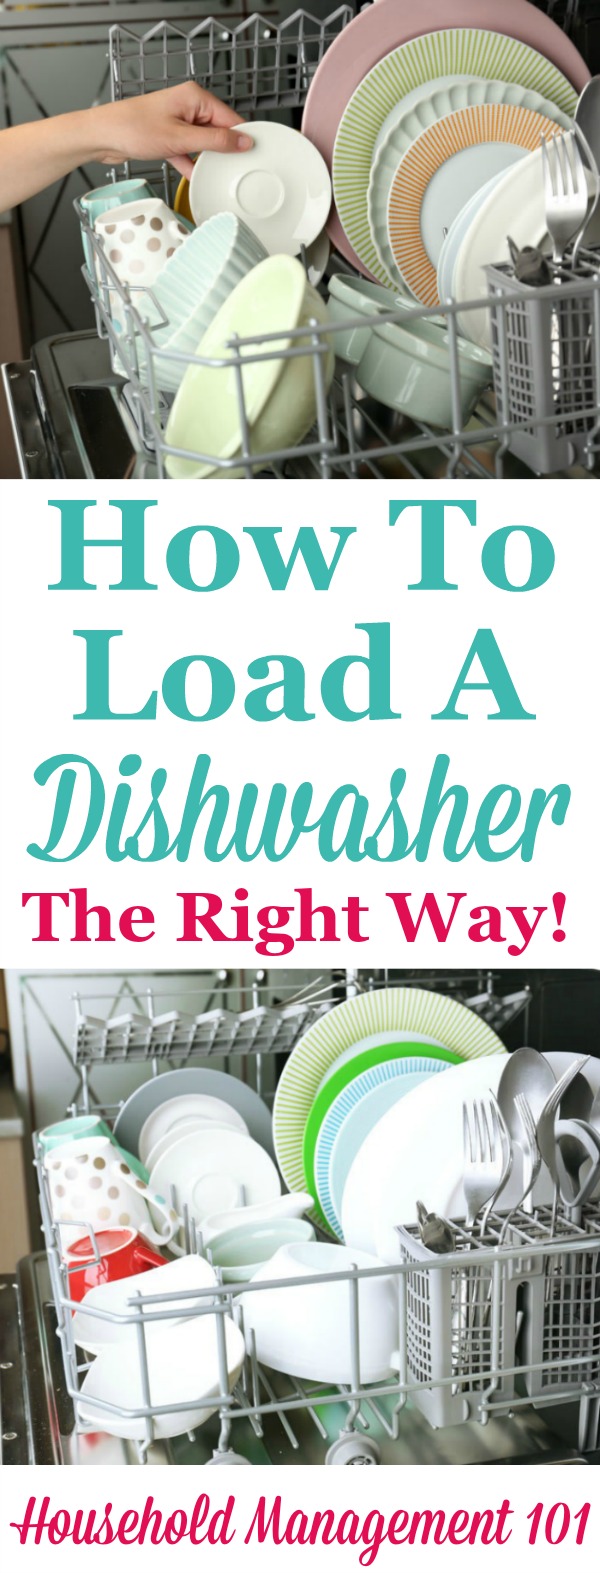 Tips and instructions for how to load a dishwasher the right way, so that everything gets cleaned. Includes instructions for the top and bottom rack and the silverware basket. {on Household Management 101}